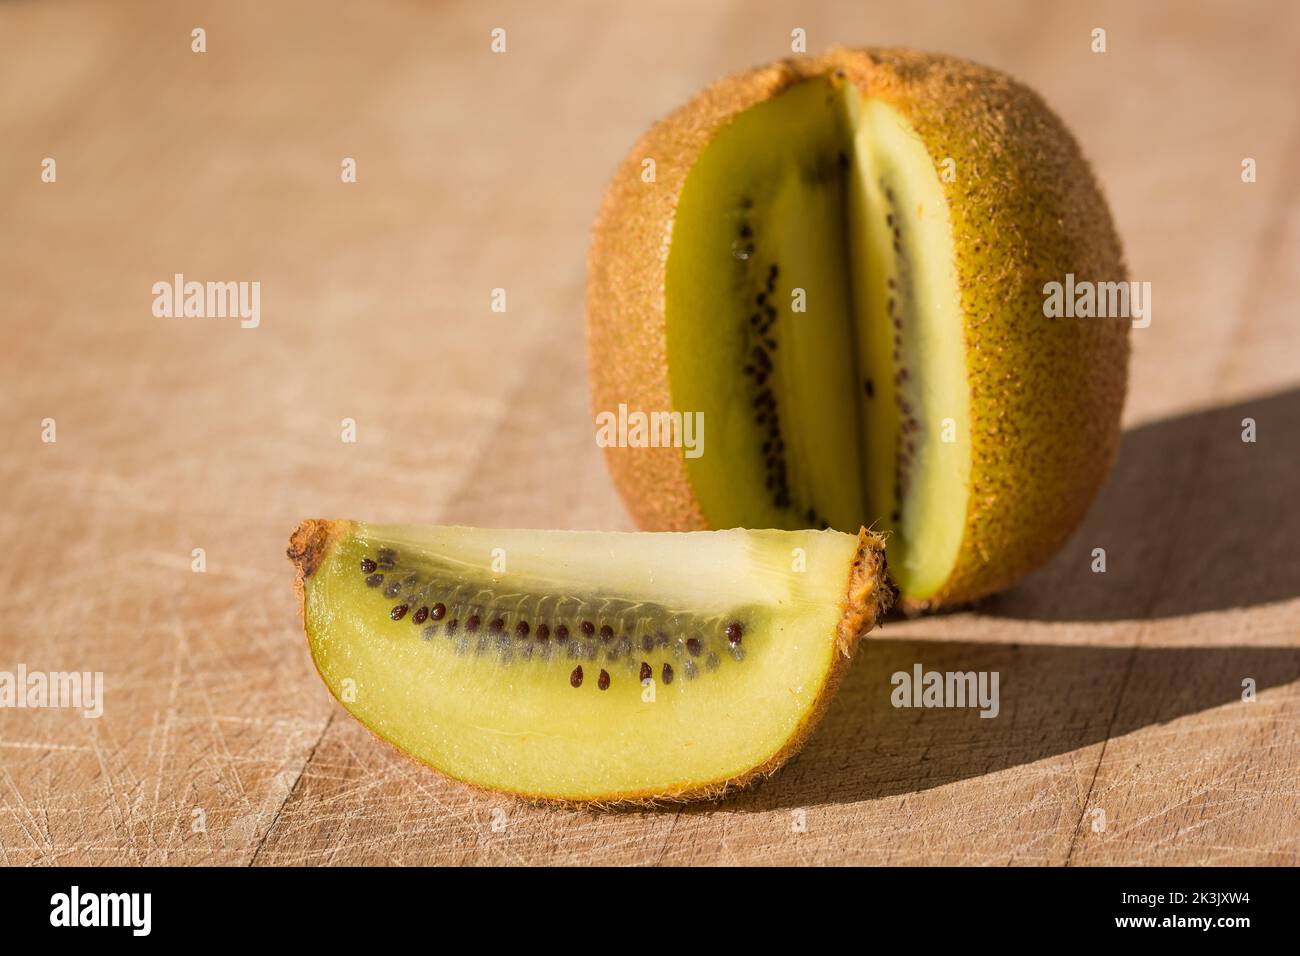 Close-up view of kiwi fruit cut open on wooden board in south of France Stock Photo